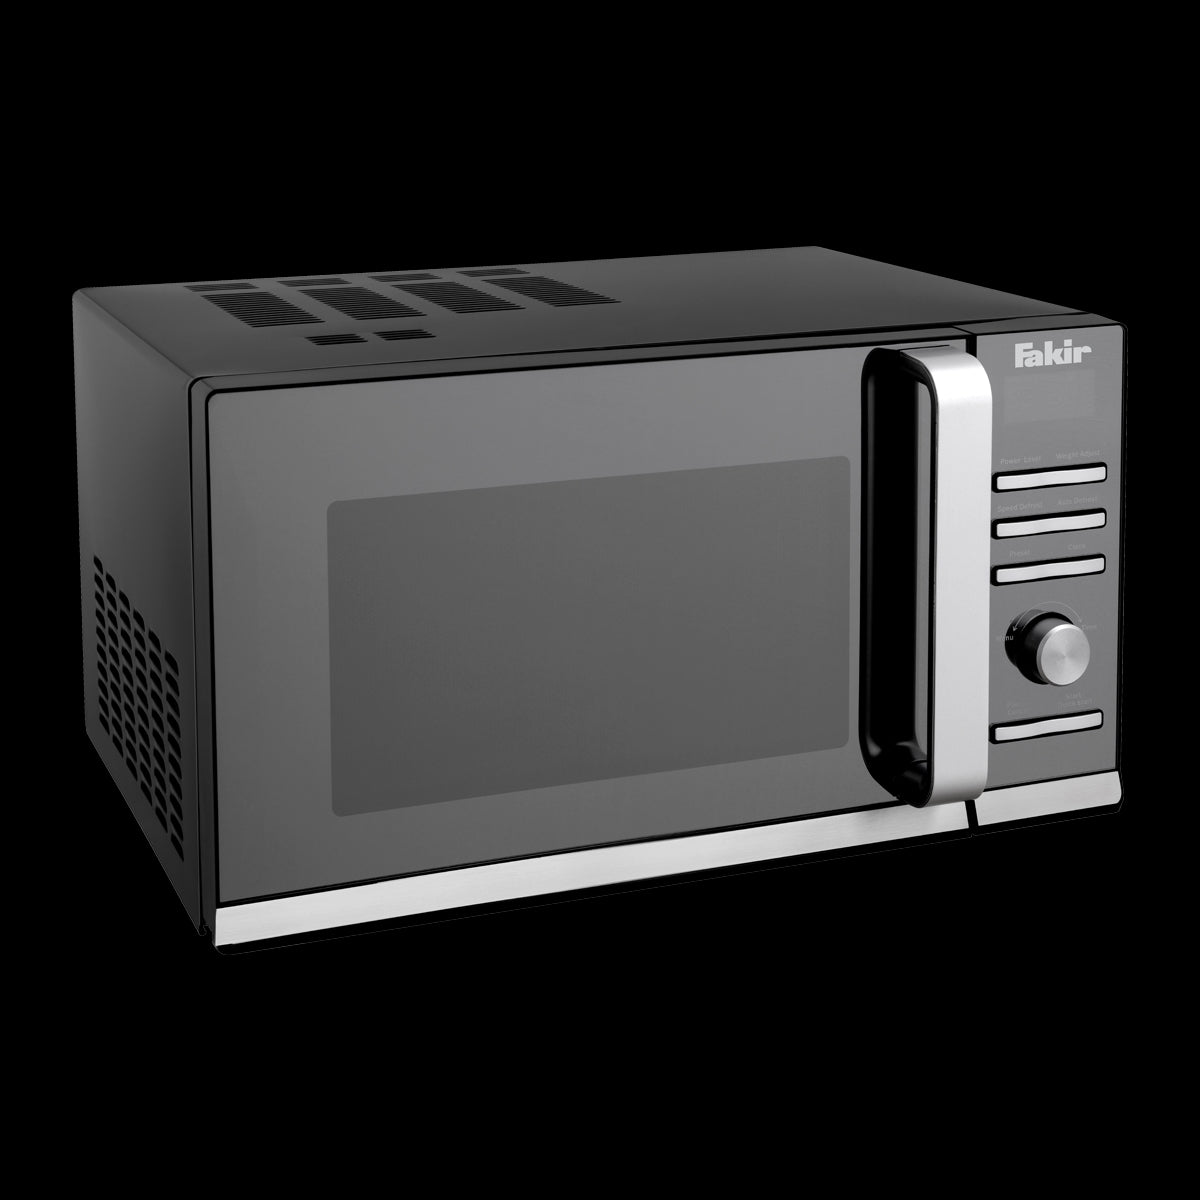 ROAST / Fakir Microwave Oven with grill 25 liters 6 power levels, black, 1100 watt 25 L / YES / BLACK